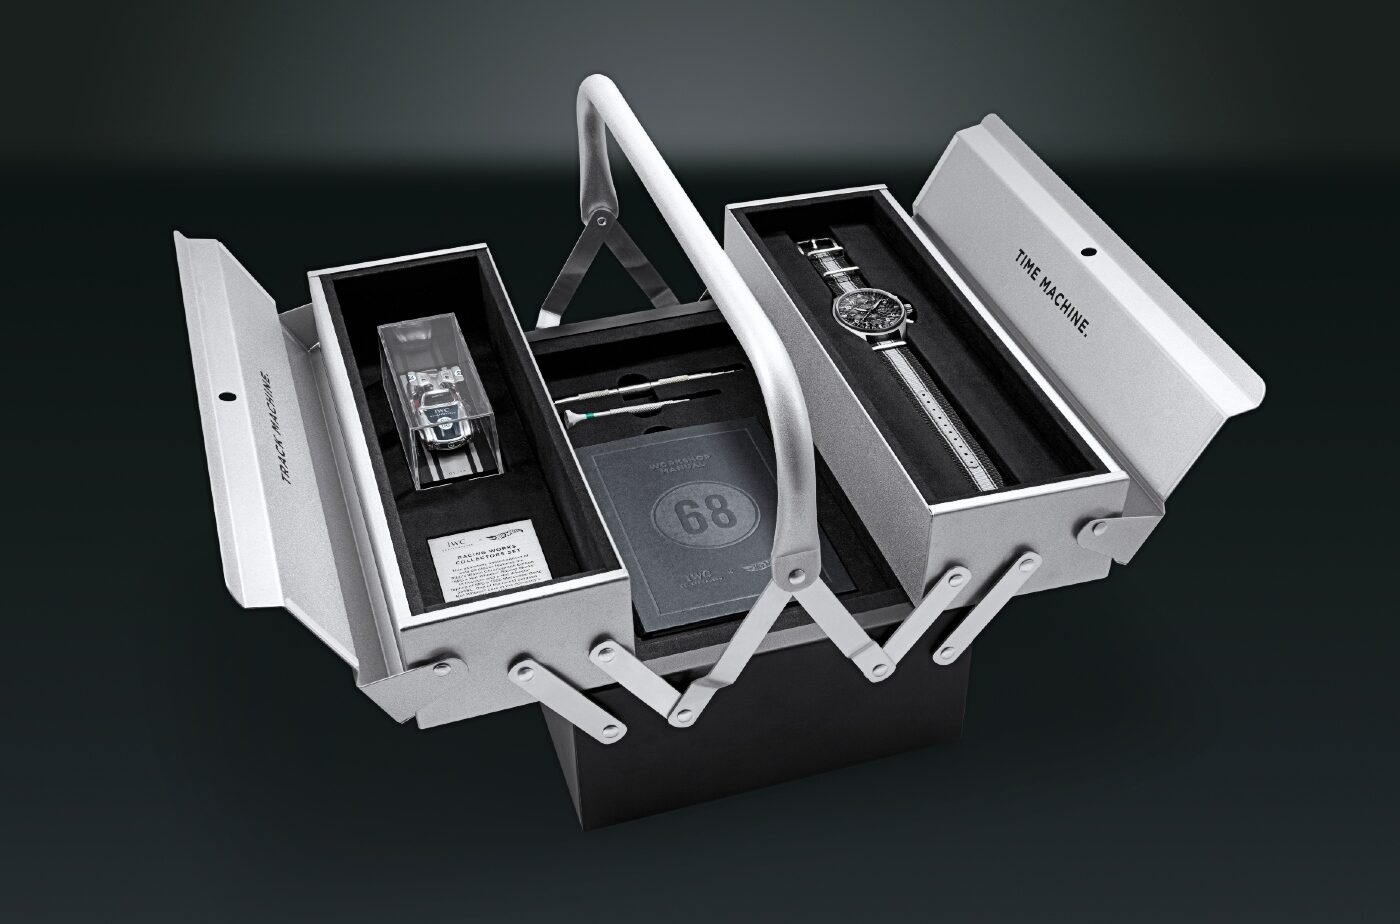 iwc packaging toolbox 2 1